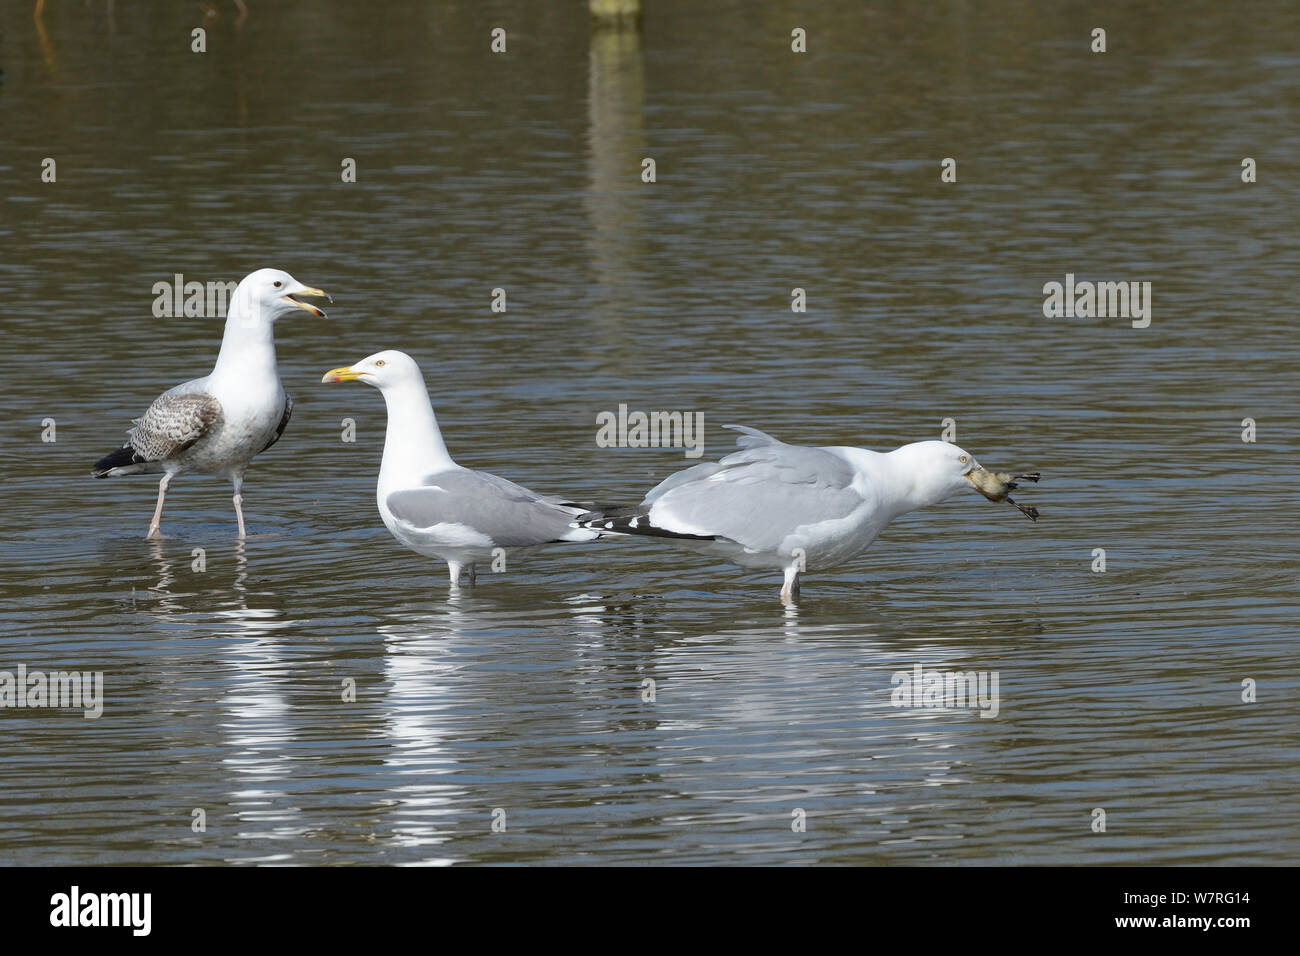 Adult Herring gull (Larus argentatus) swallowing a Mallard duckling (Anas platyrhynchos) as a juvenile Herring gull looks on and calls, Gloucesterhire, UK, April. Stock Photo